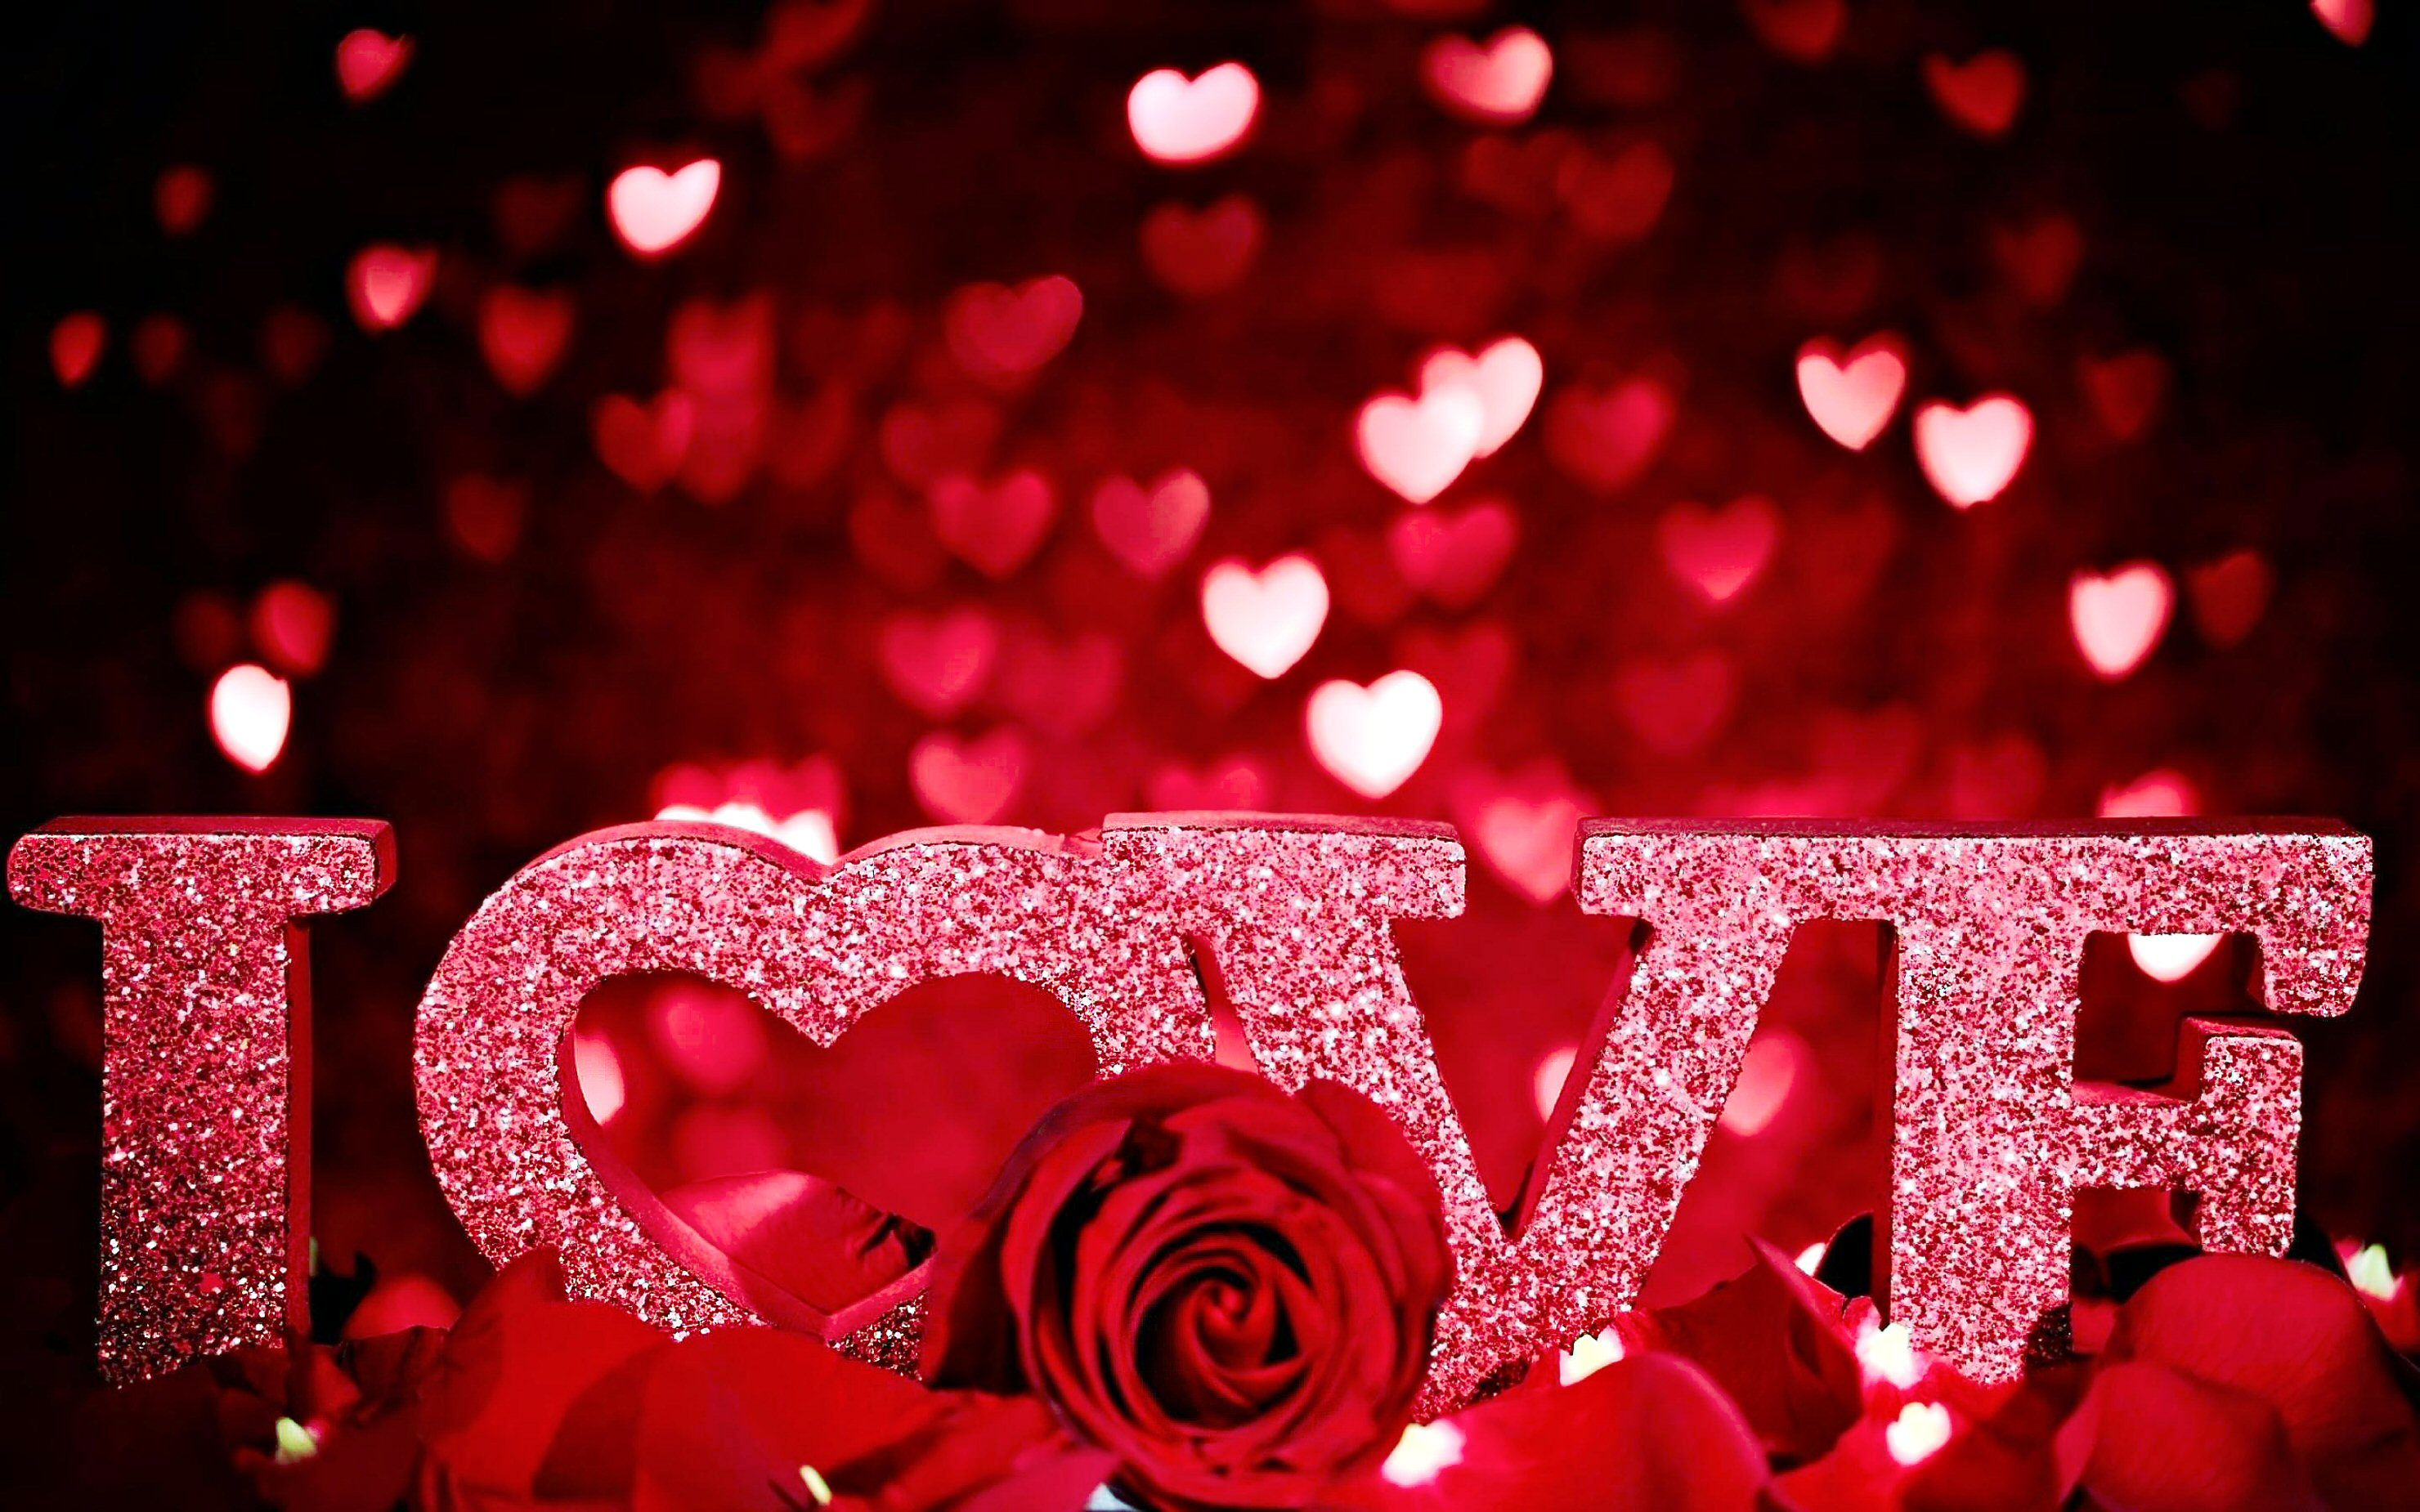 The word love is written in red letters with hearts and roses - Valentine's Day